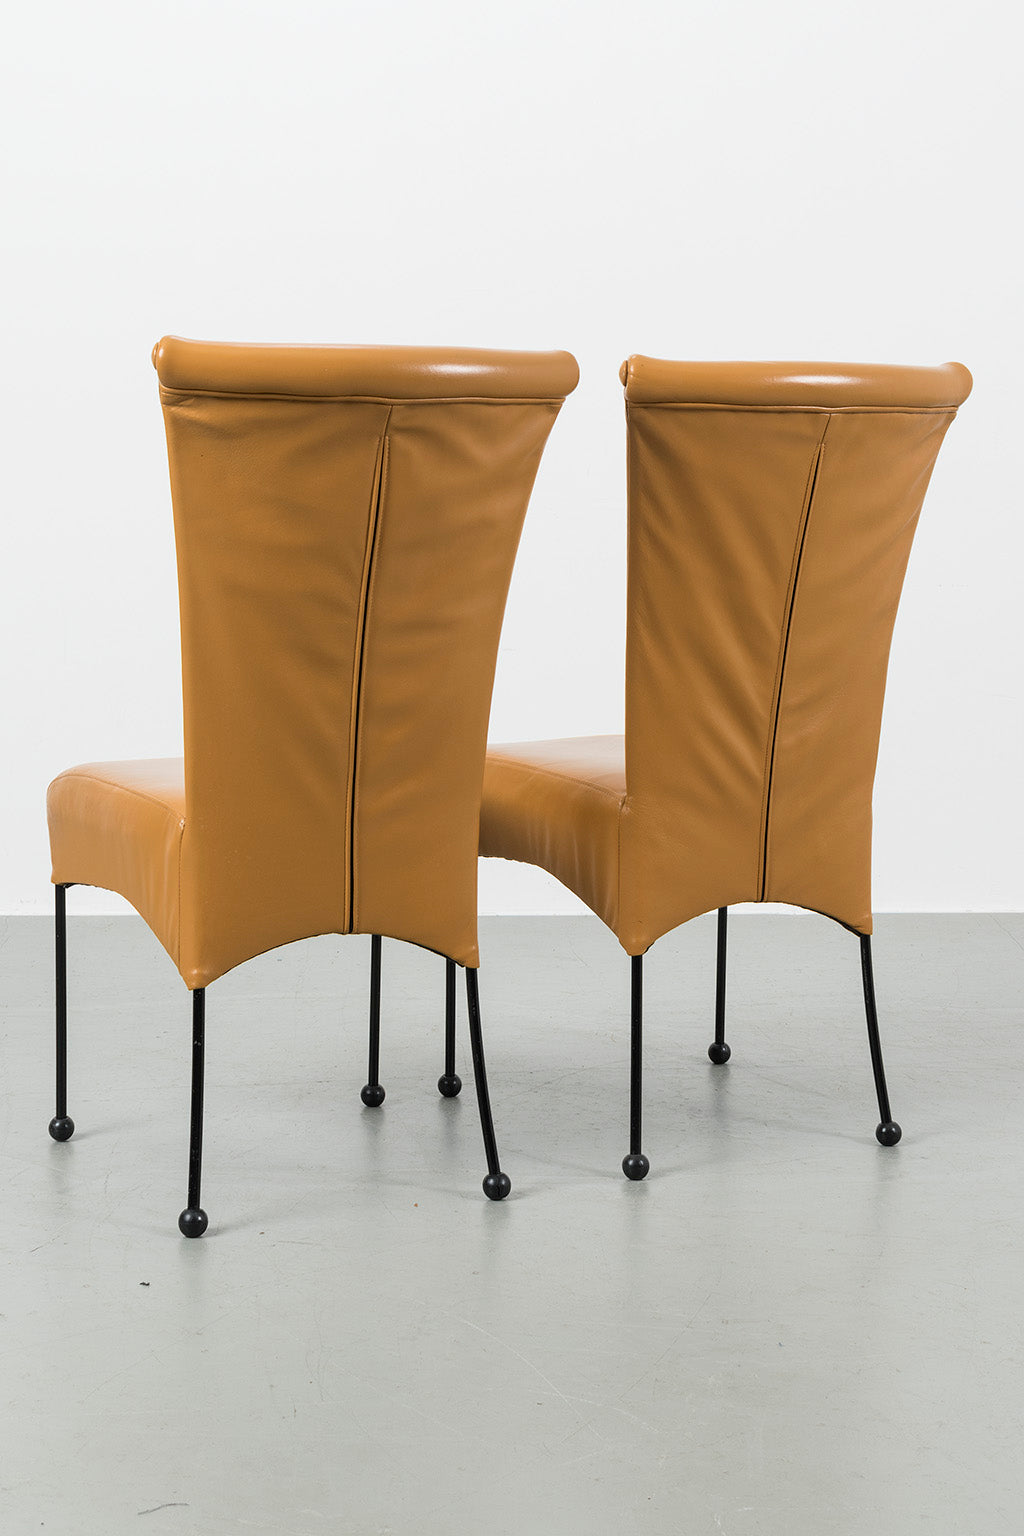 2x modern dining room chairs